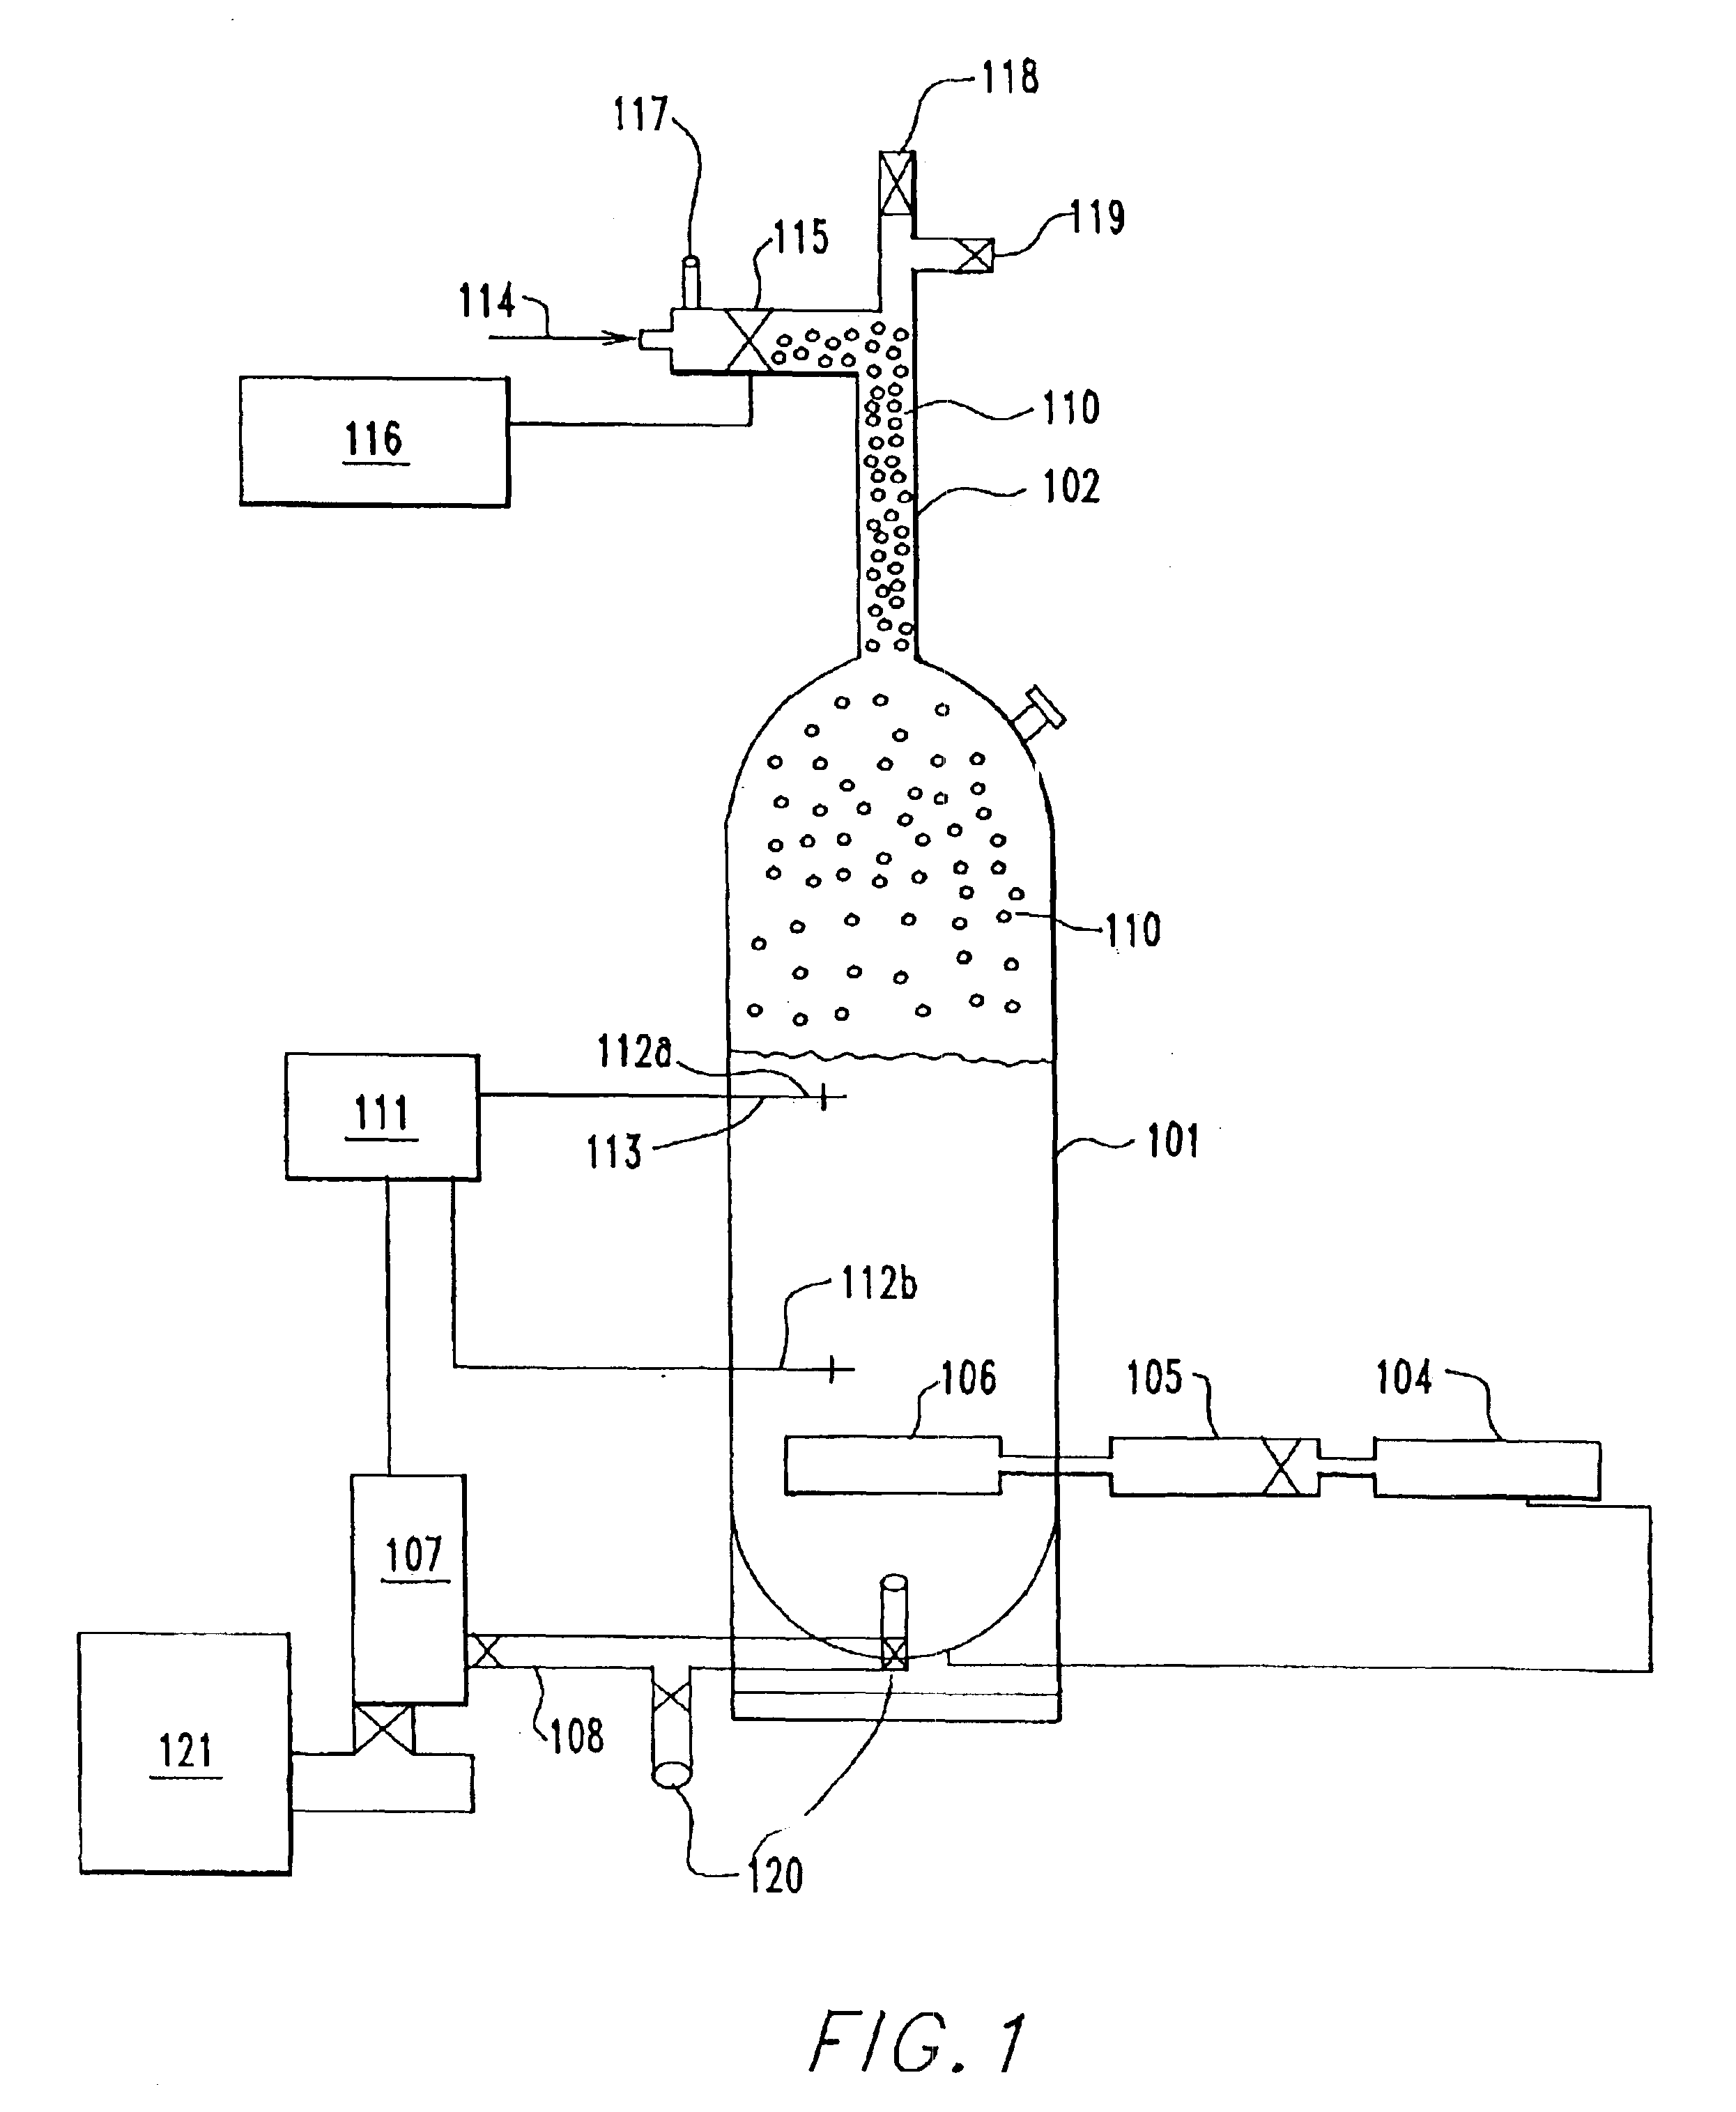 Method and apparatus to clean and apply foamed corrosion inhibitor to ferrous surfaces